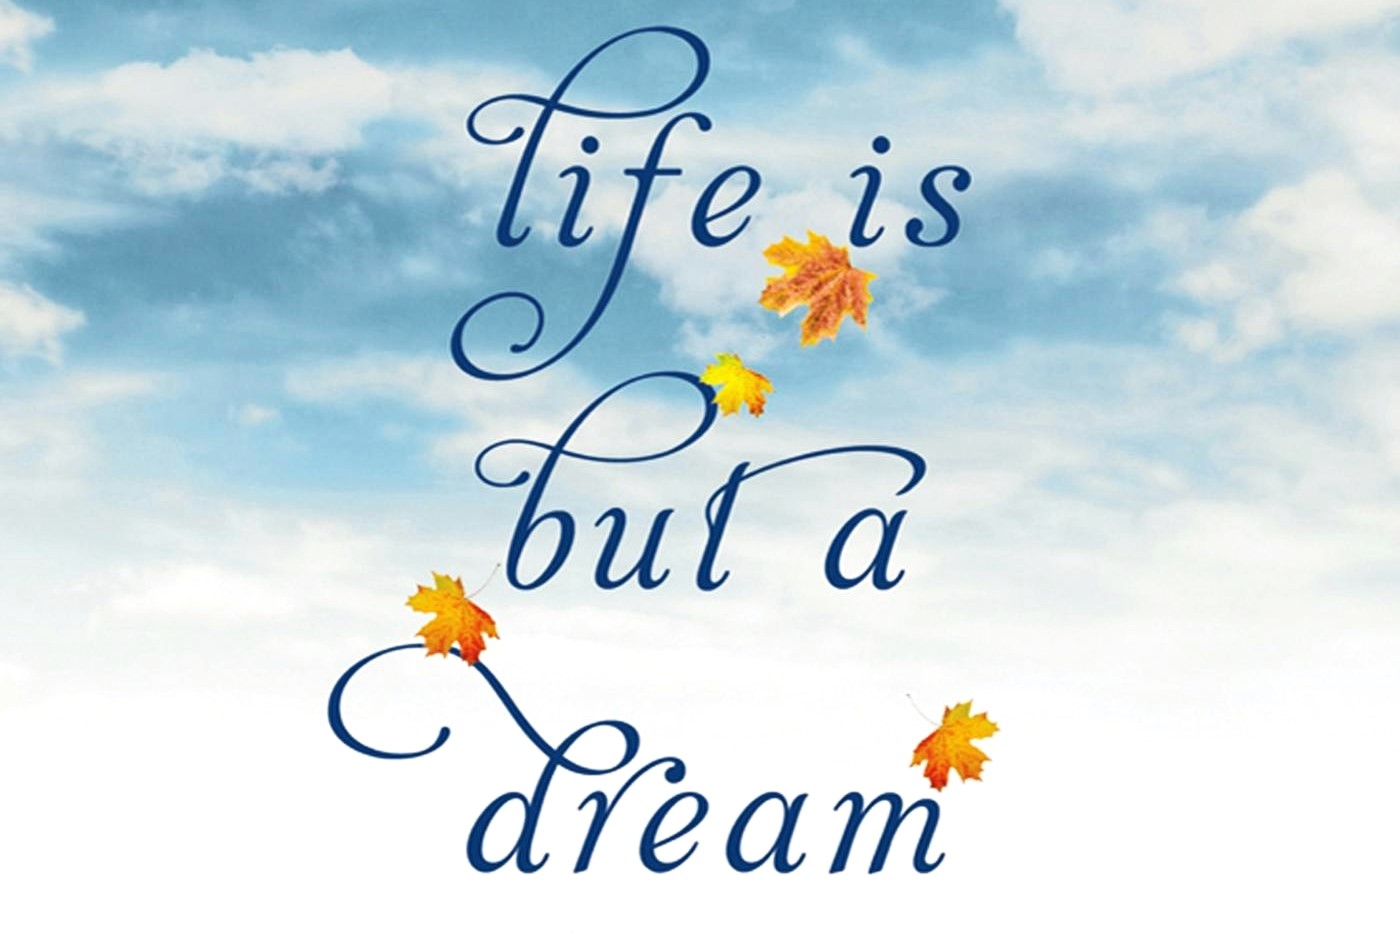 The Hidden Meaning Behind “Life Is But A Dream”